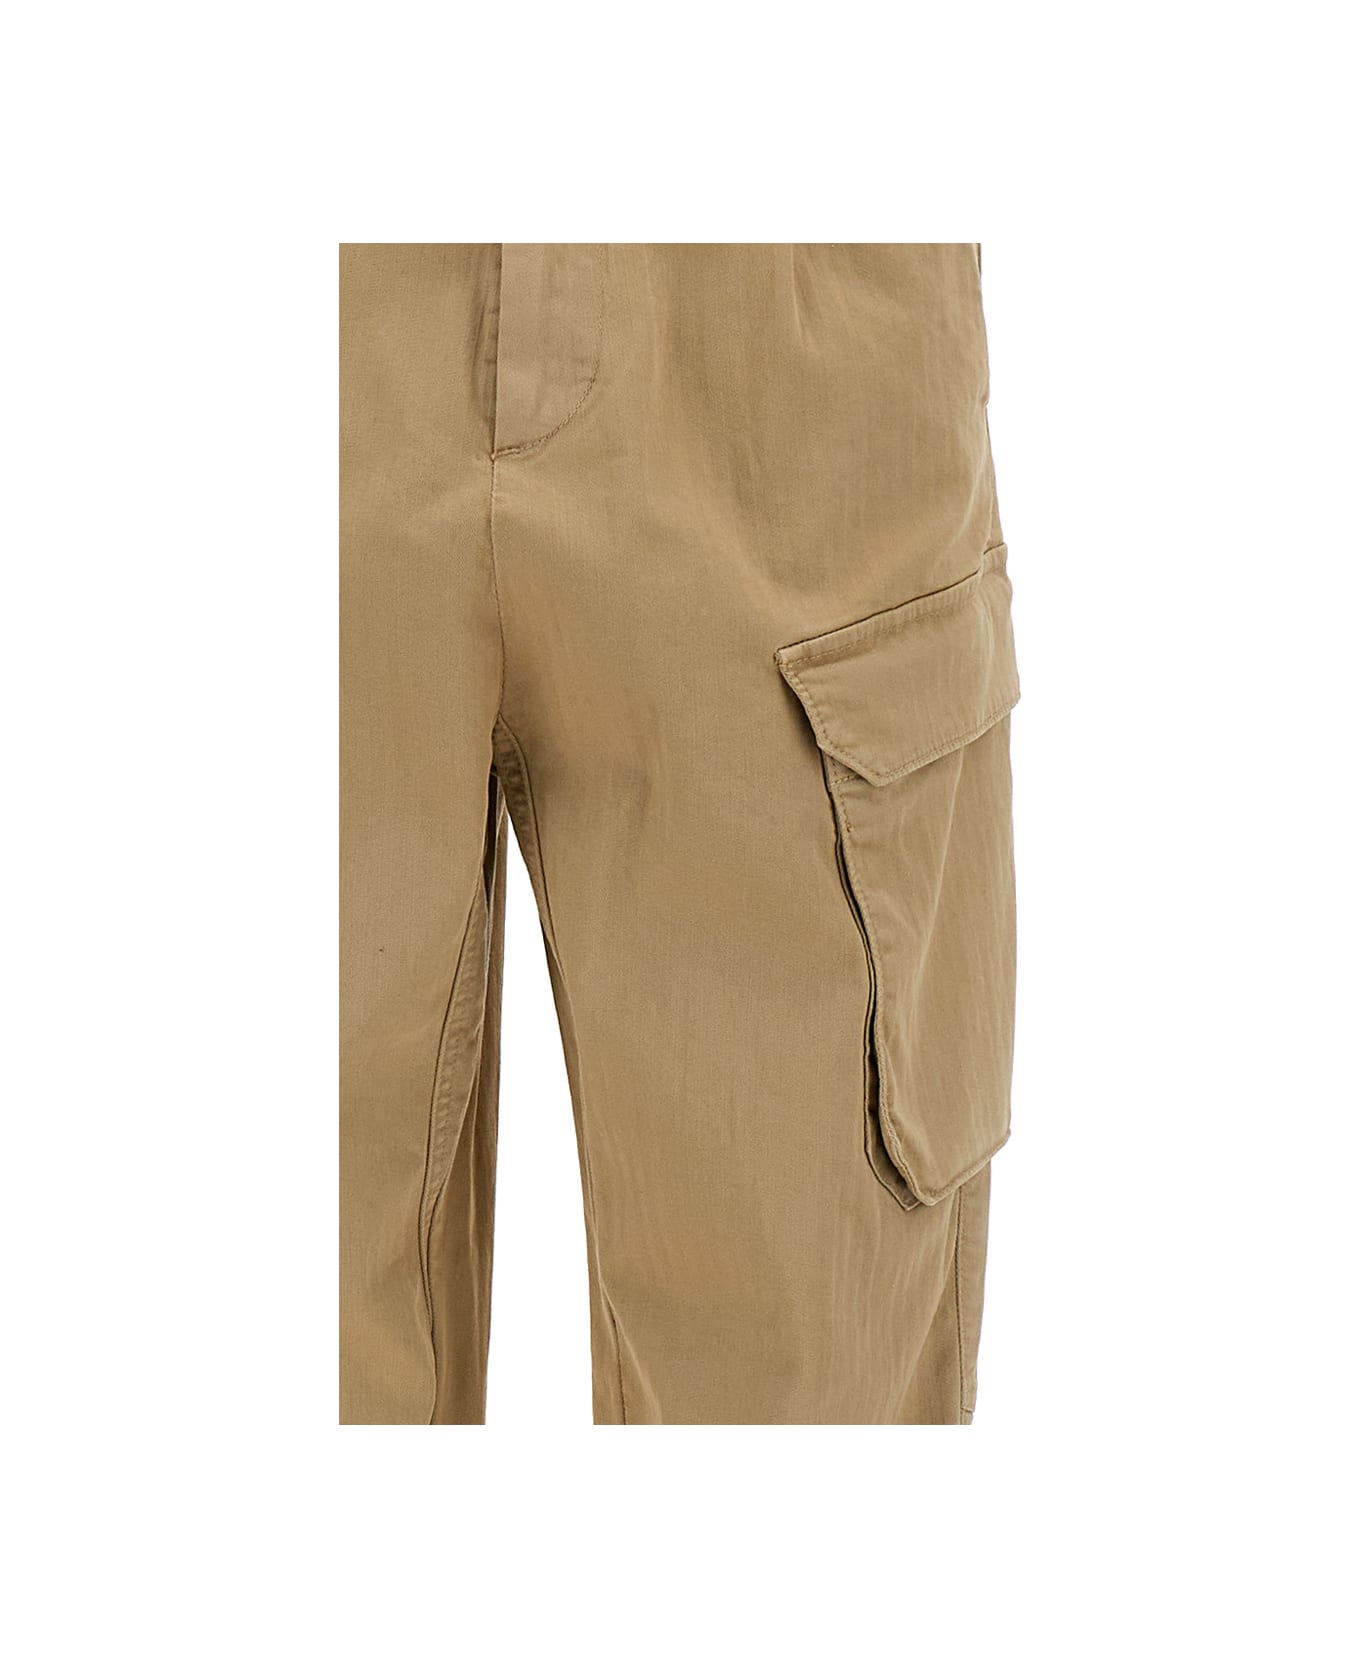 SEMICOUTURE Sand-colored Cargo Pants In Cotton Blend Woman - Beige ボトムス